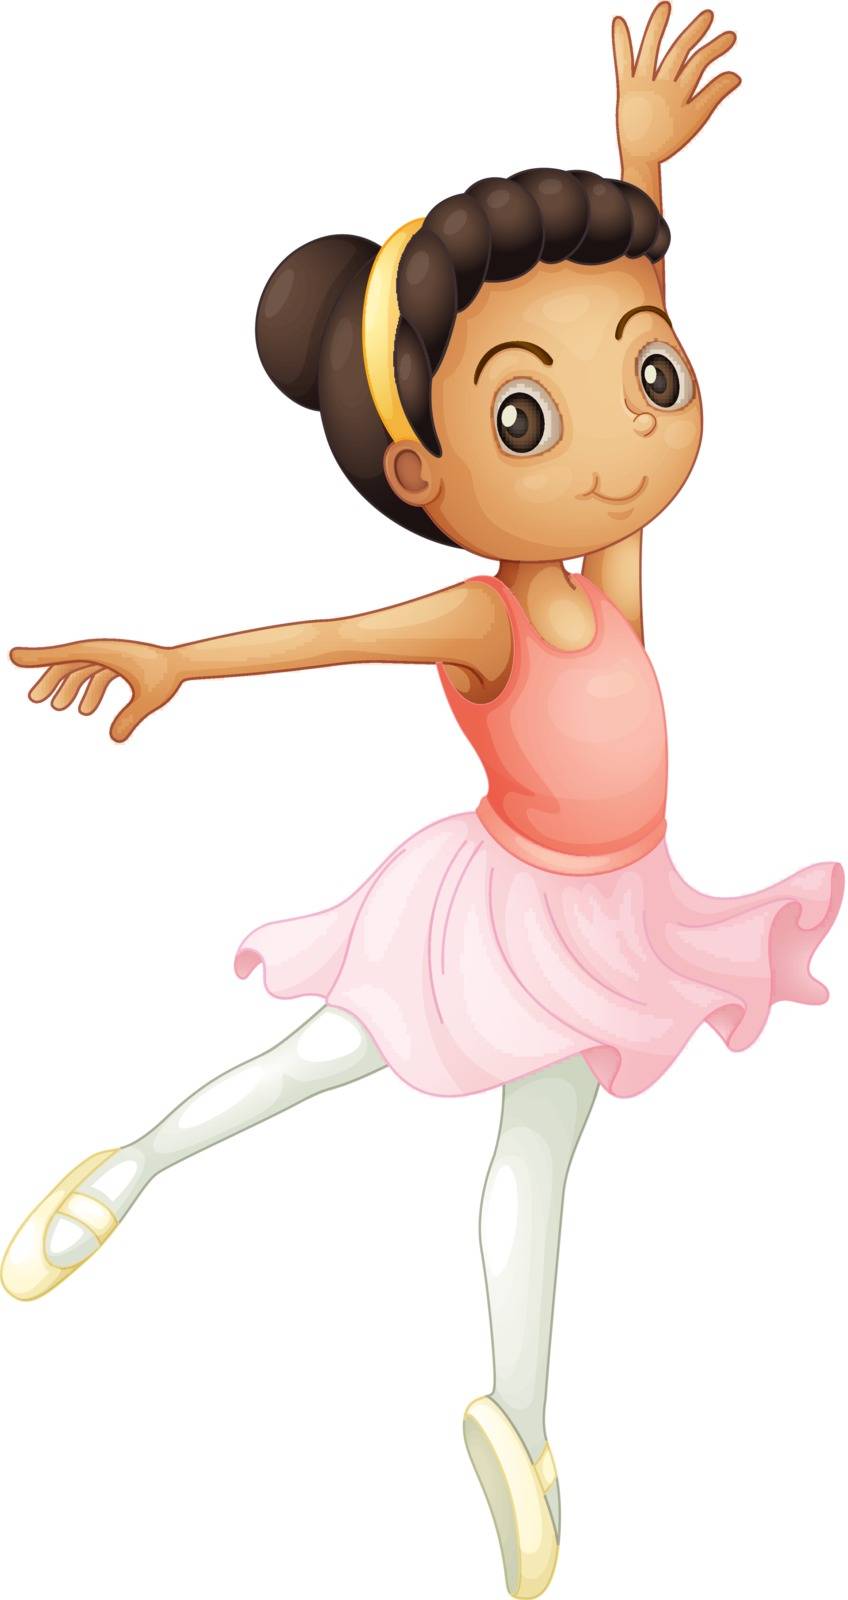 Illustration of a young ballerina